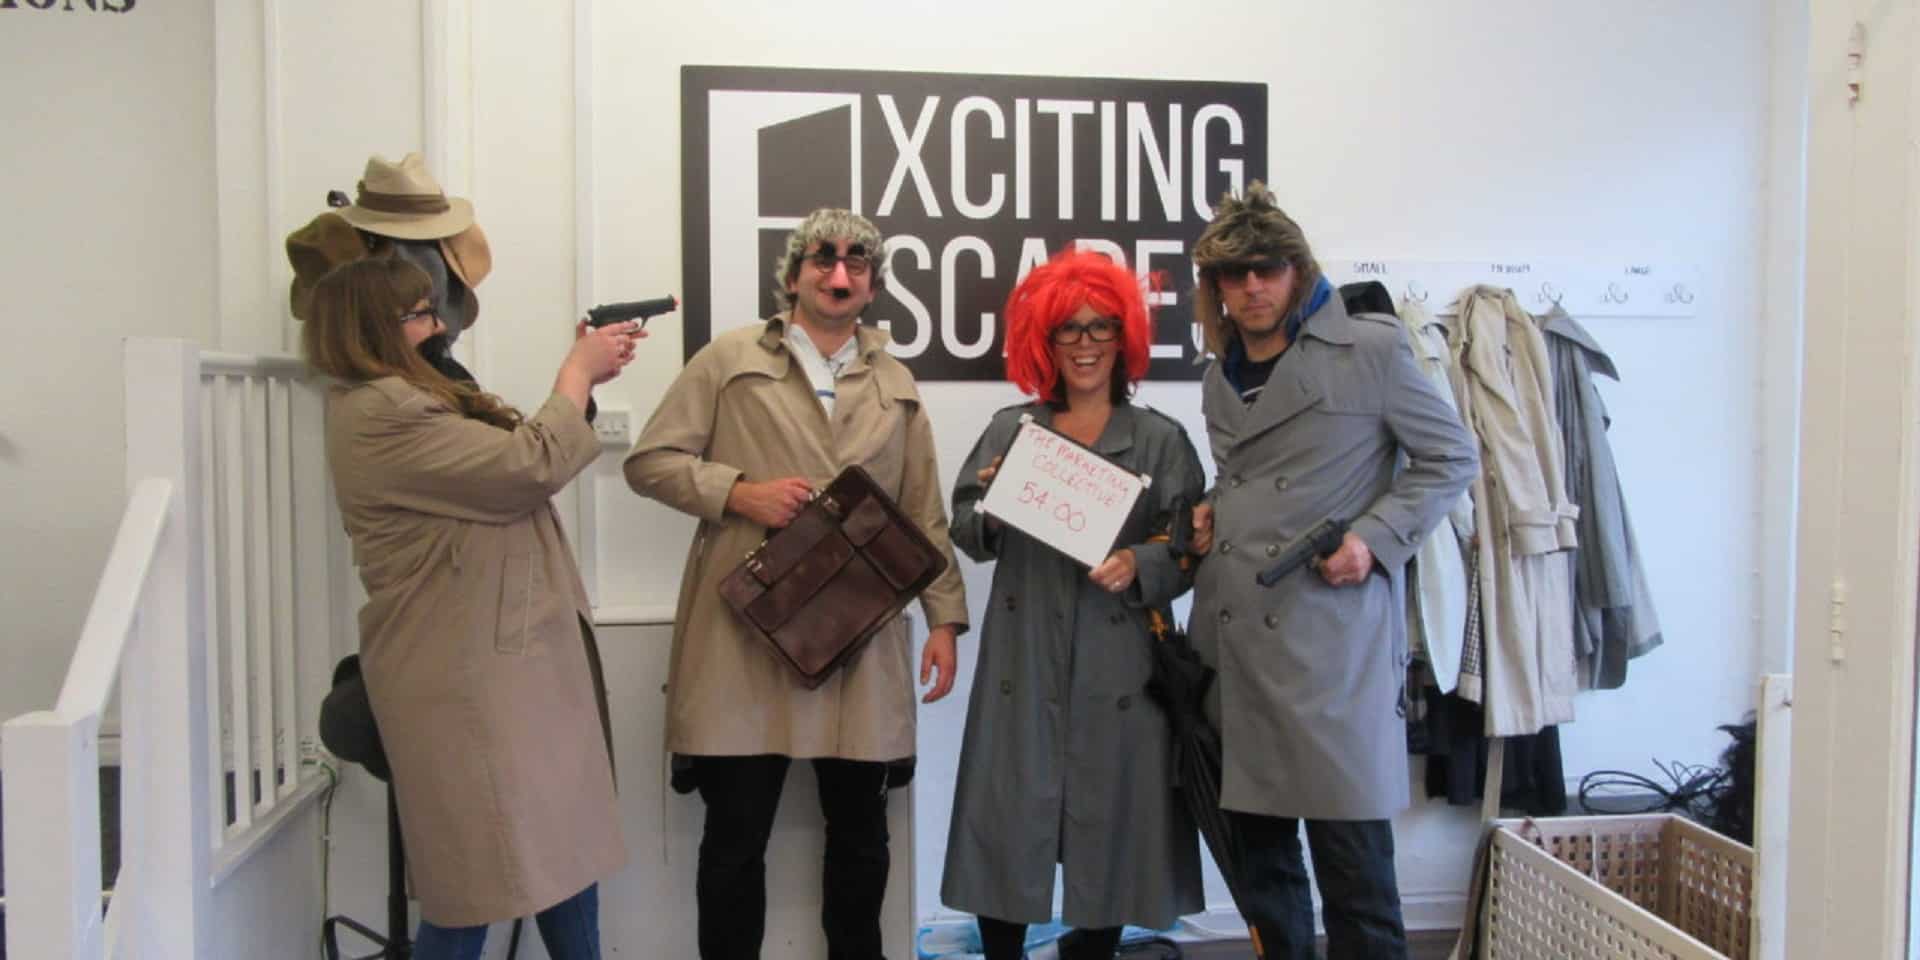 Exciting Escapes Southampton- Escape Room Experience in UK